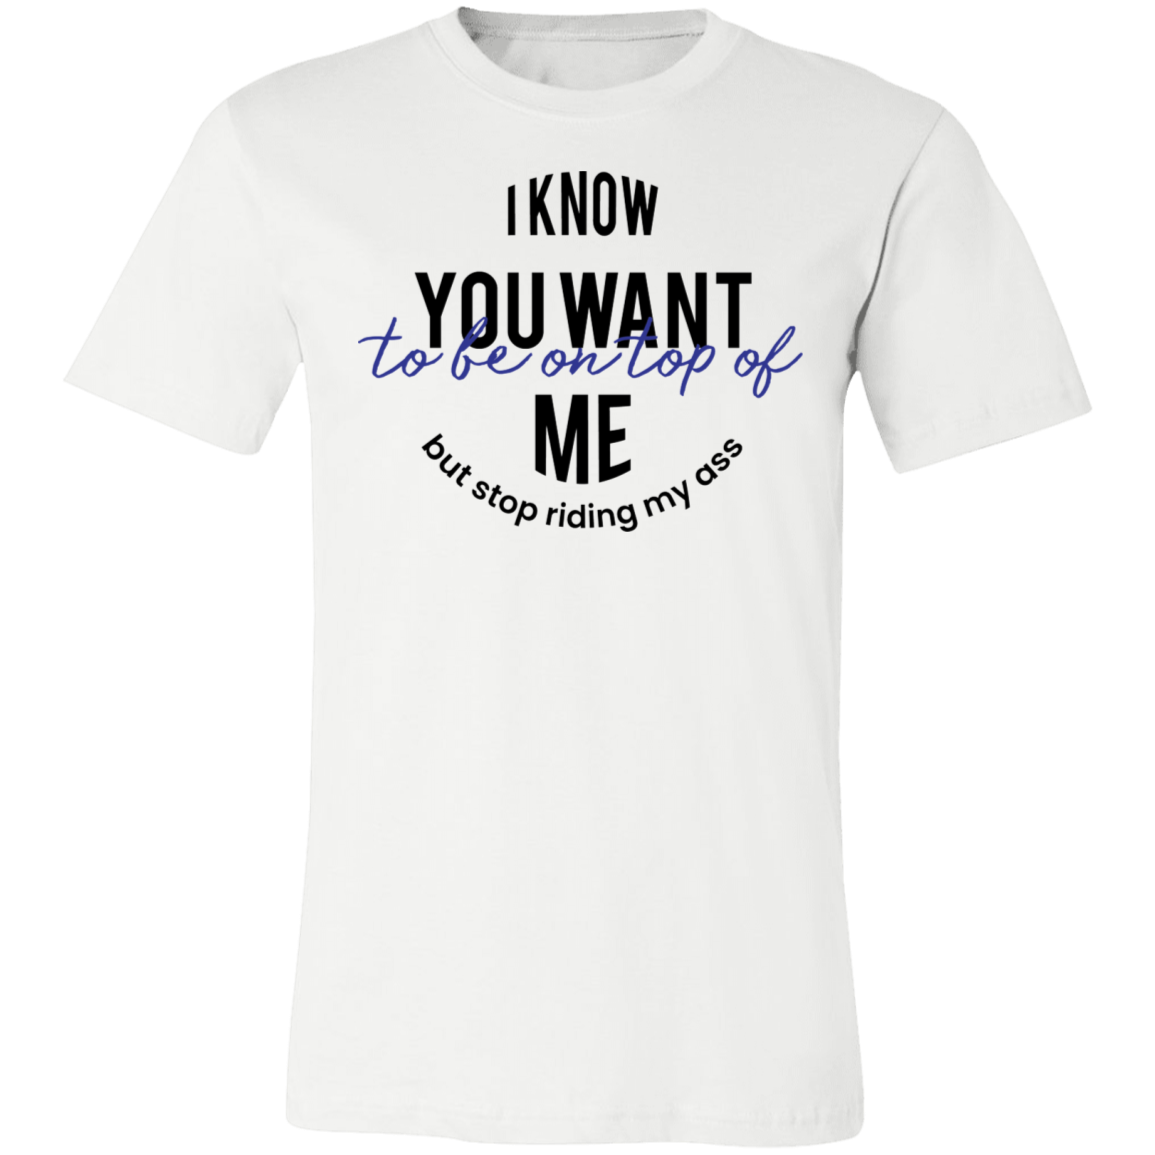 I Know You Want to Be On Top Of Me Tee